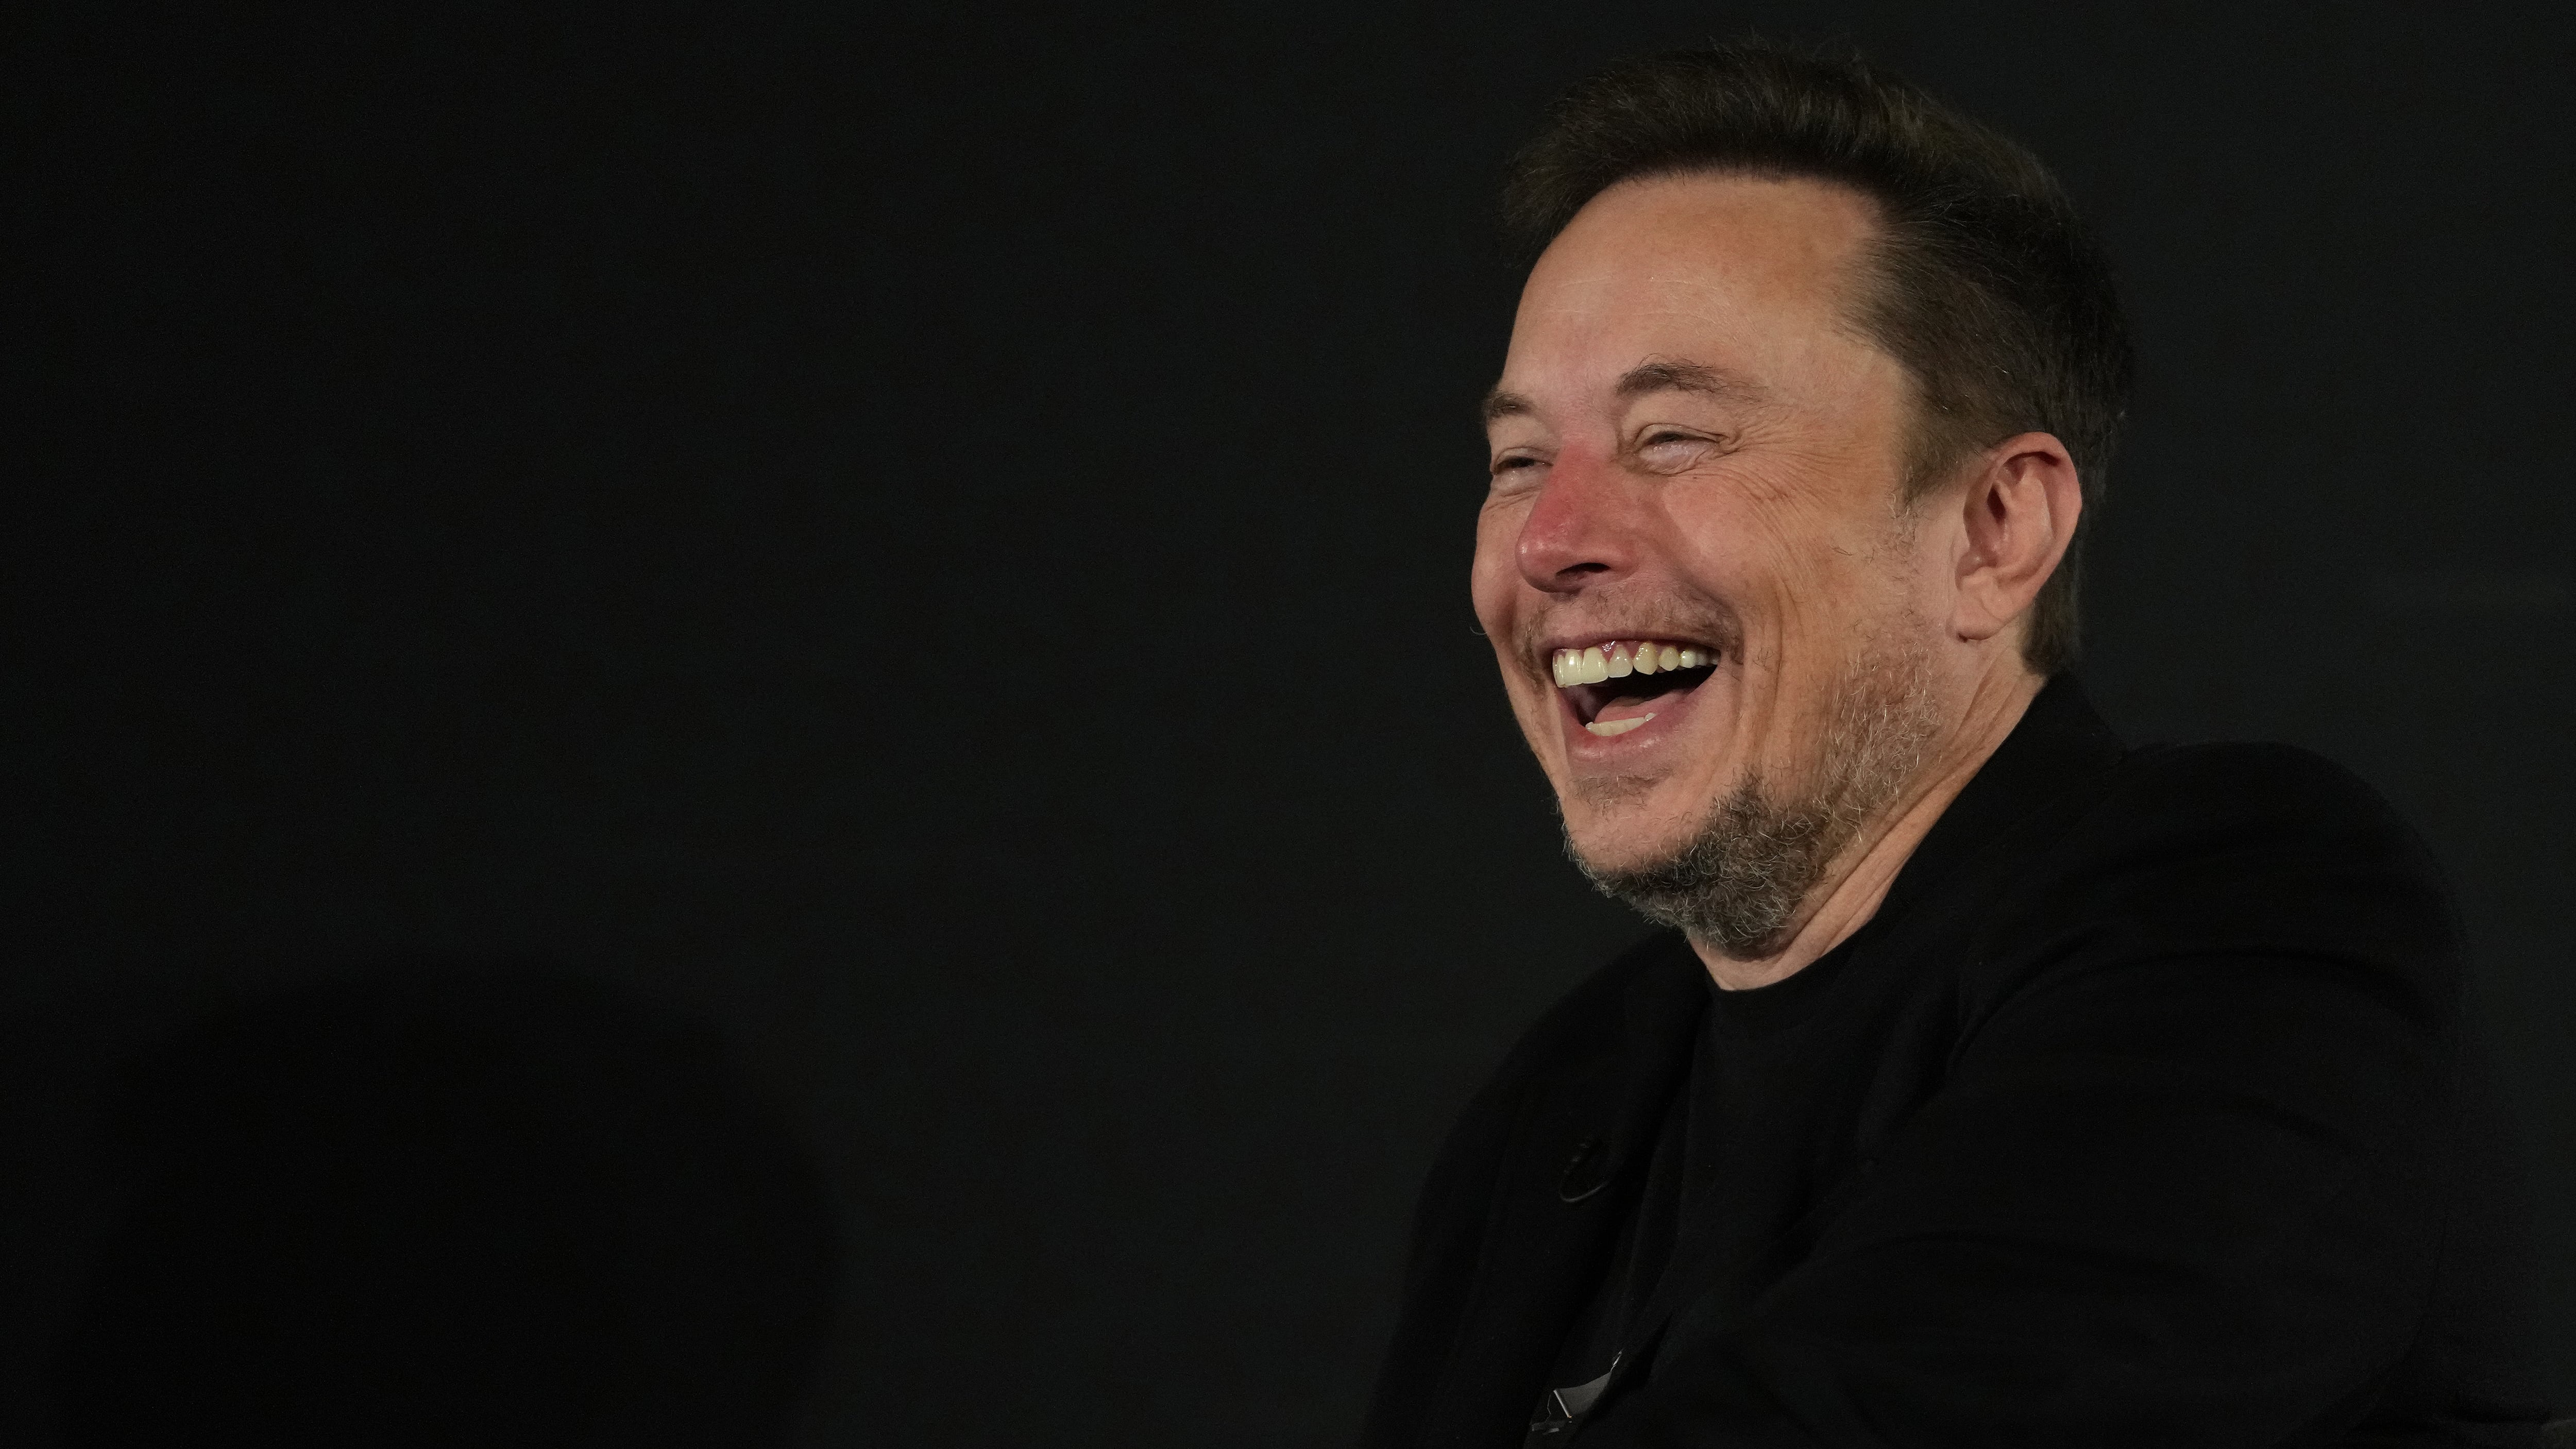 Musk will be interviewed on Piers Morgan Uncensored